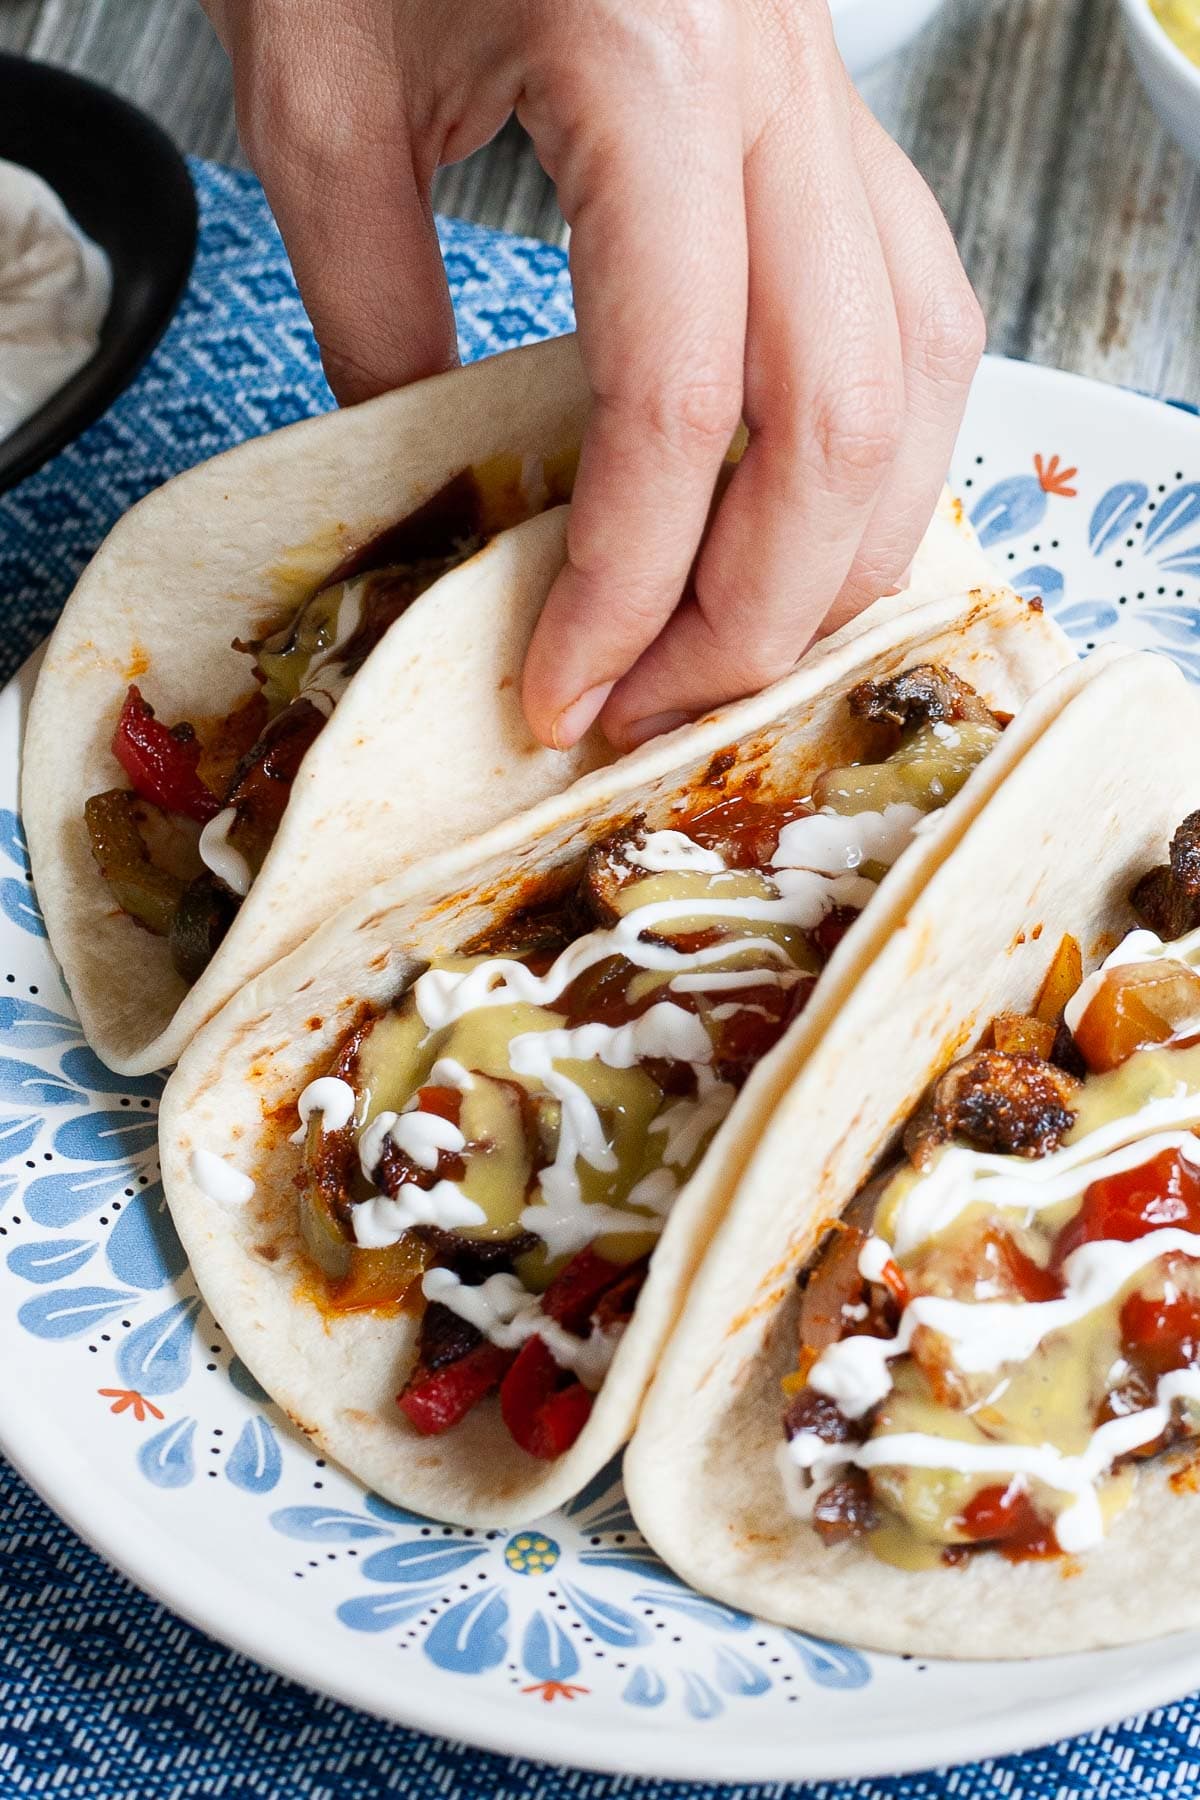 3 soft tortillas folded in half on a white blue plate filled with red pepper slices, purple onion slices and mushroom slices drizzled with white sauce, red salsa and guacamole. A hand is holding one.